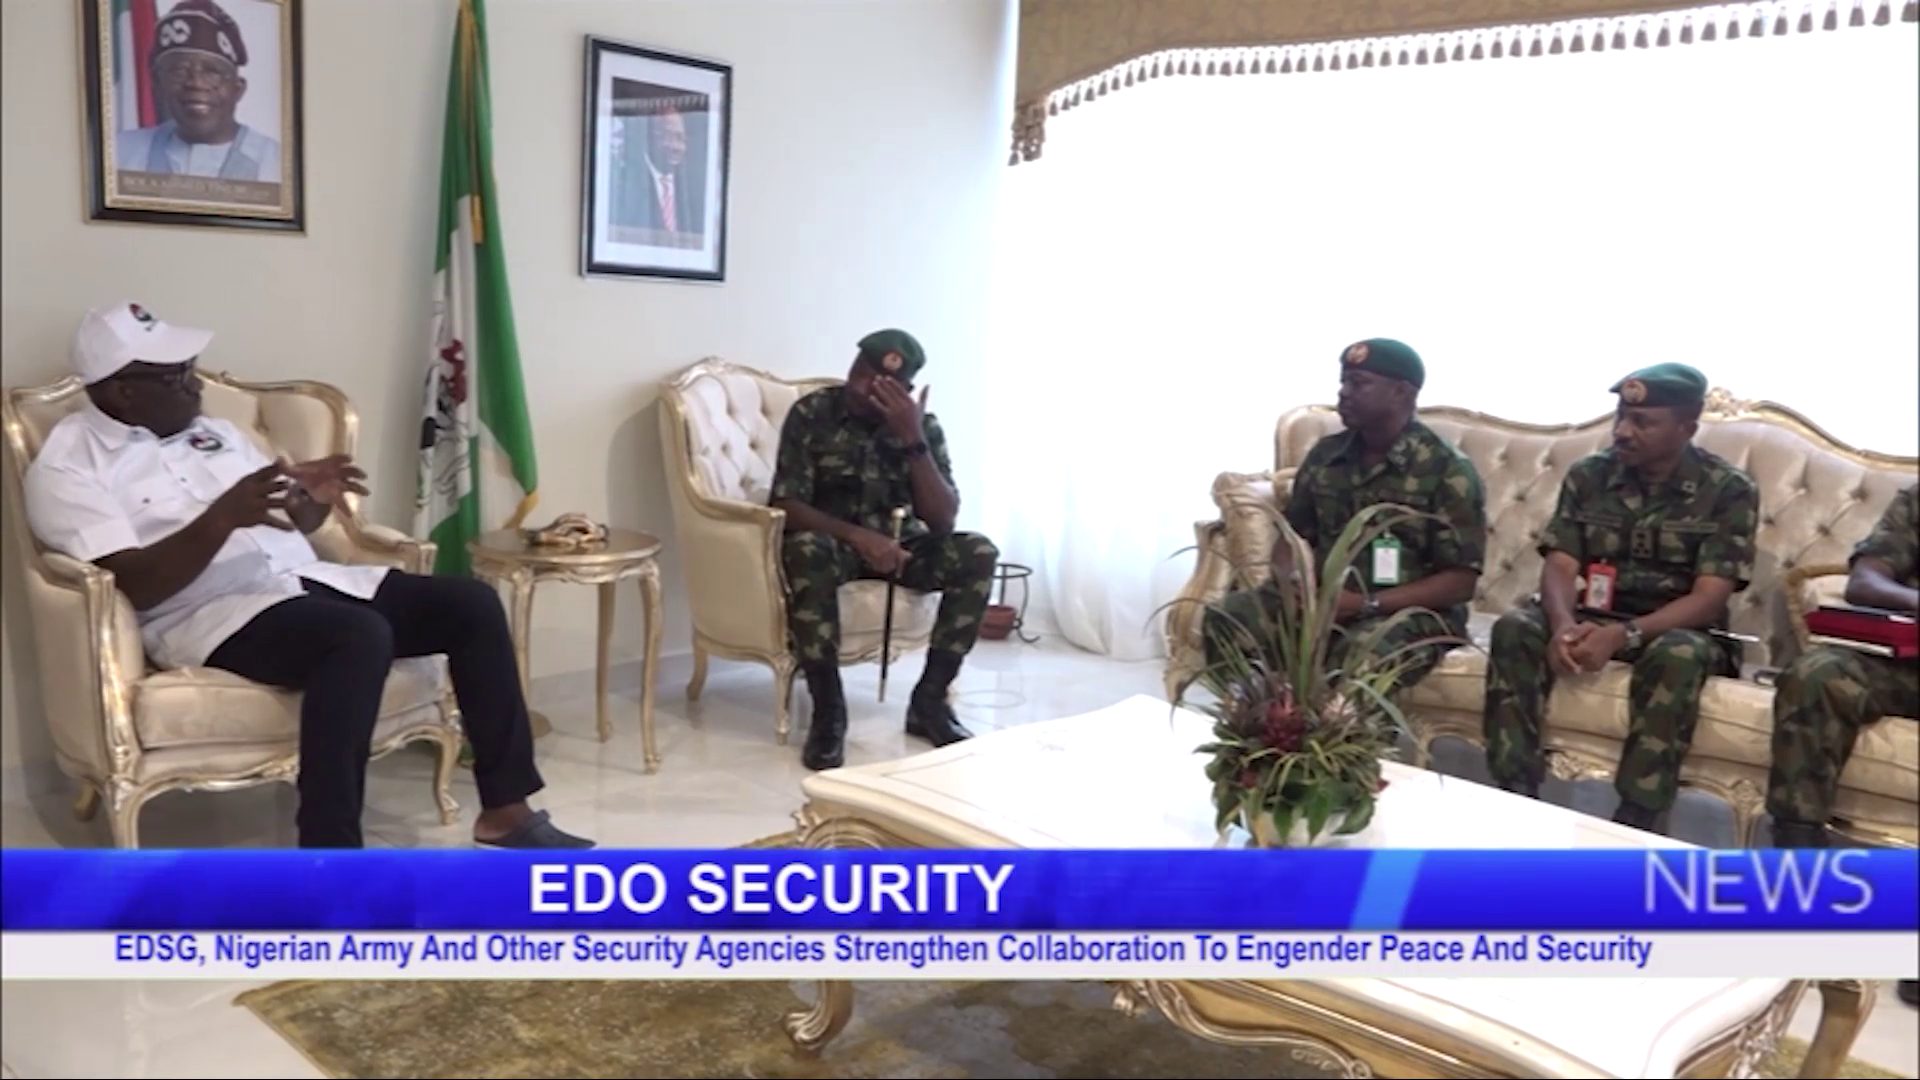 EDSG, Nigerian Army & Other Security Agencies Strengthen Collaboration To Engender Peace & Security